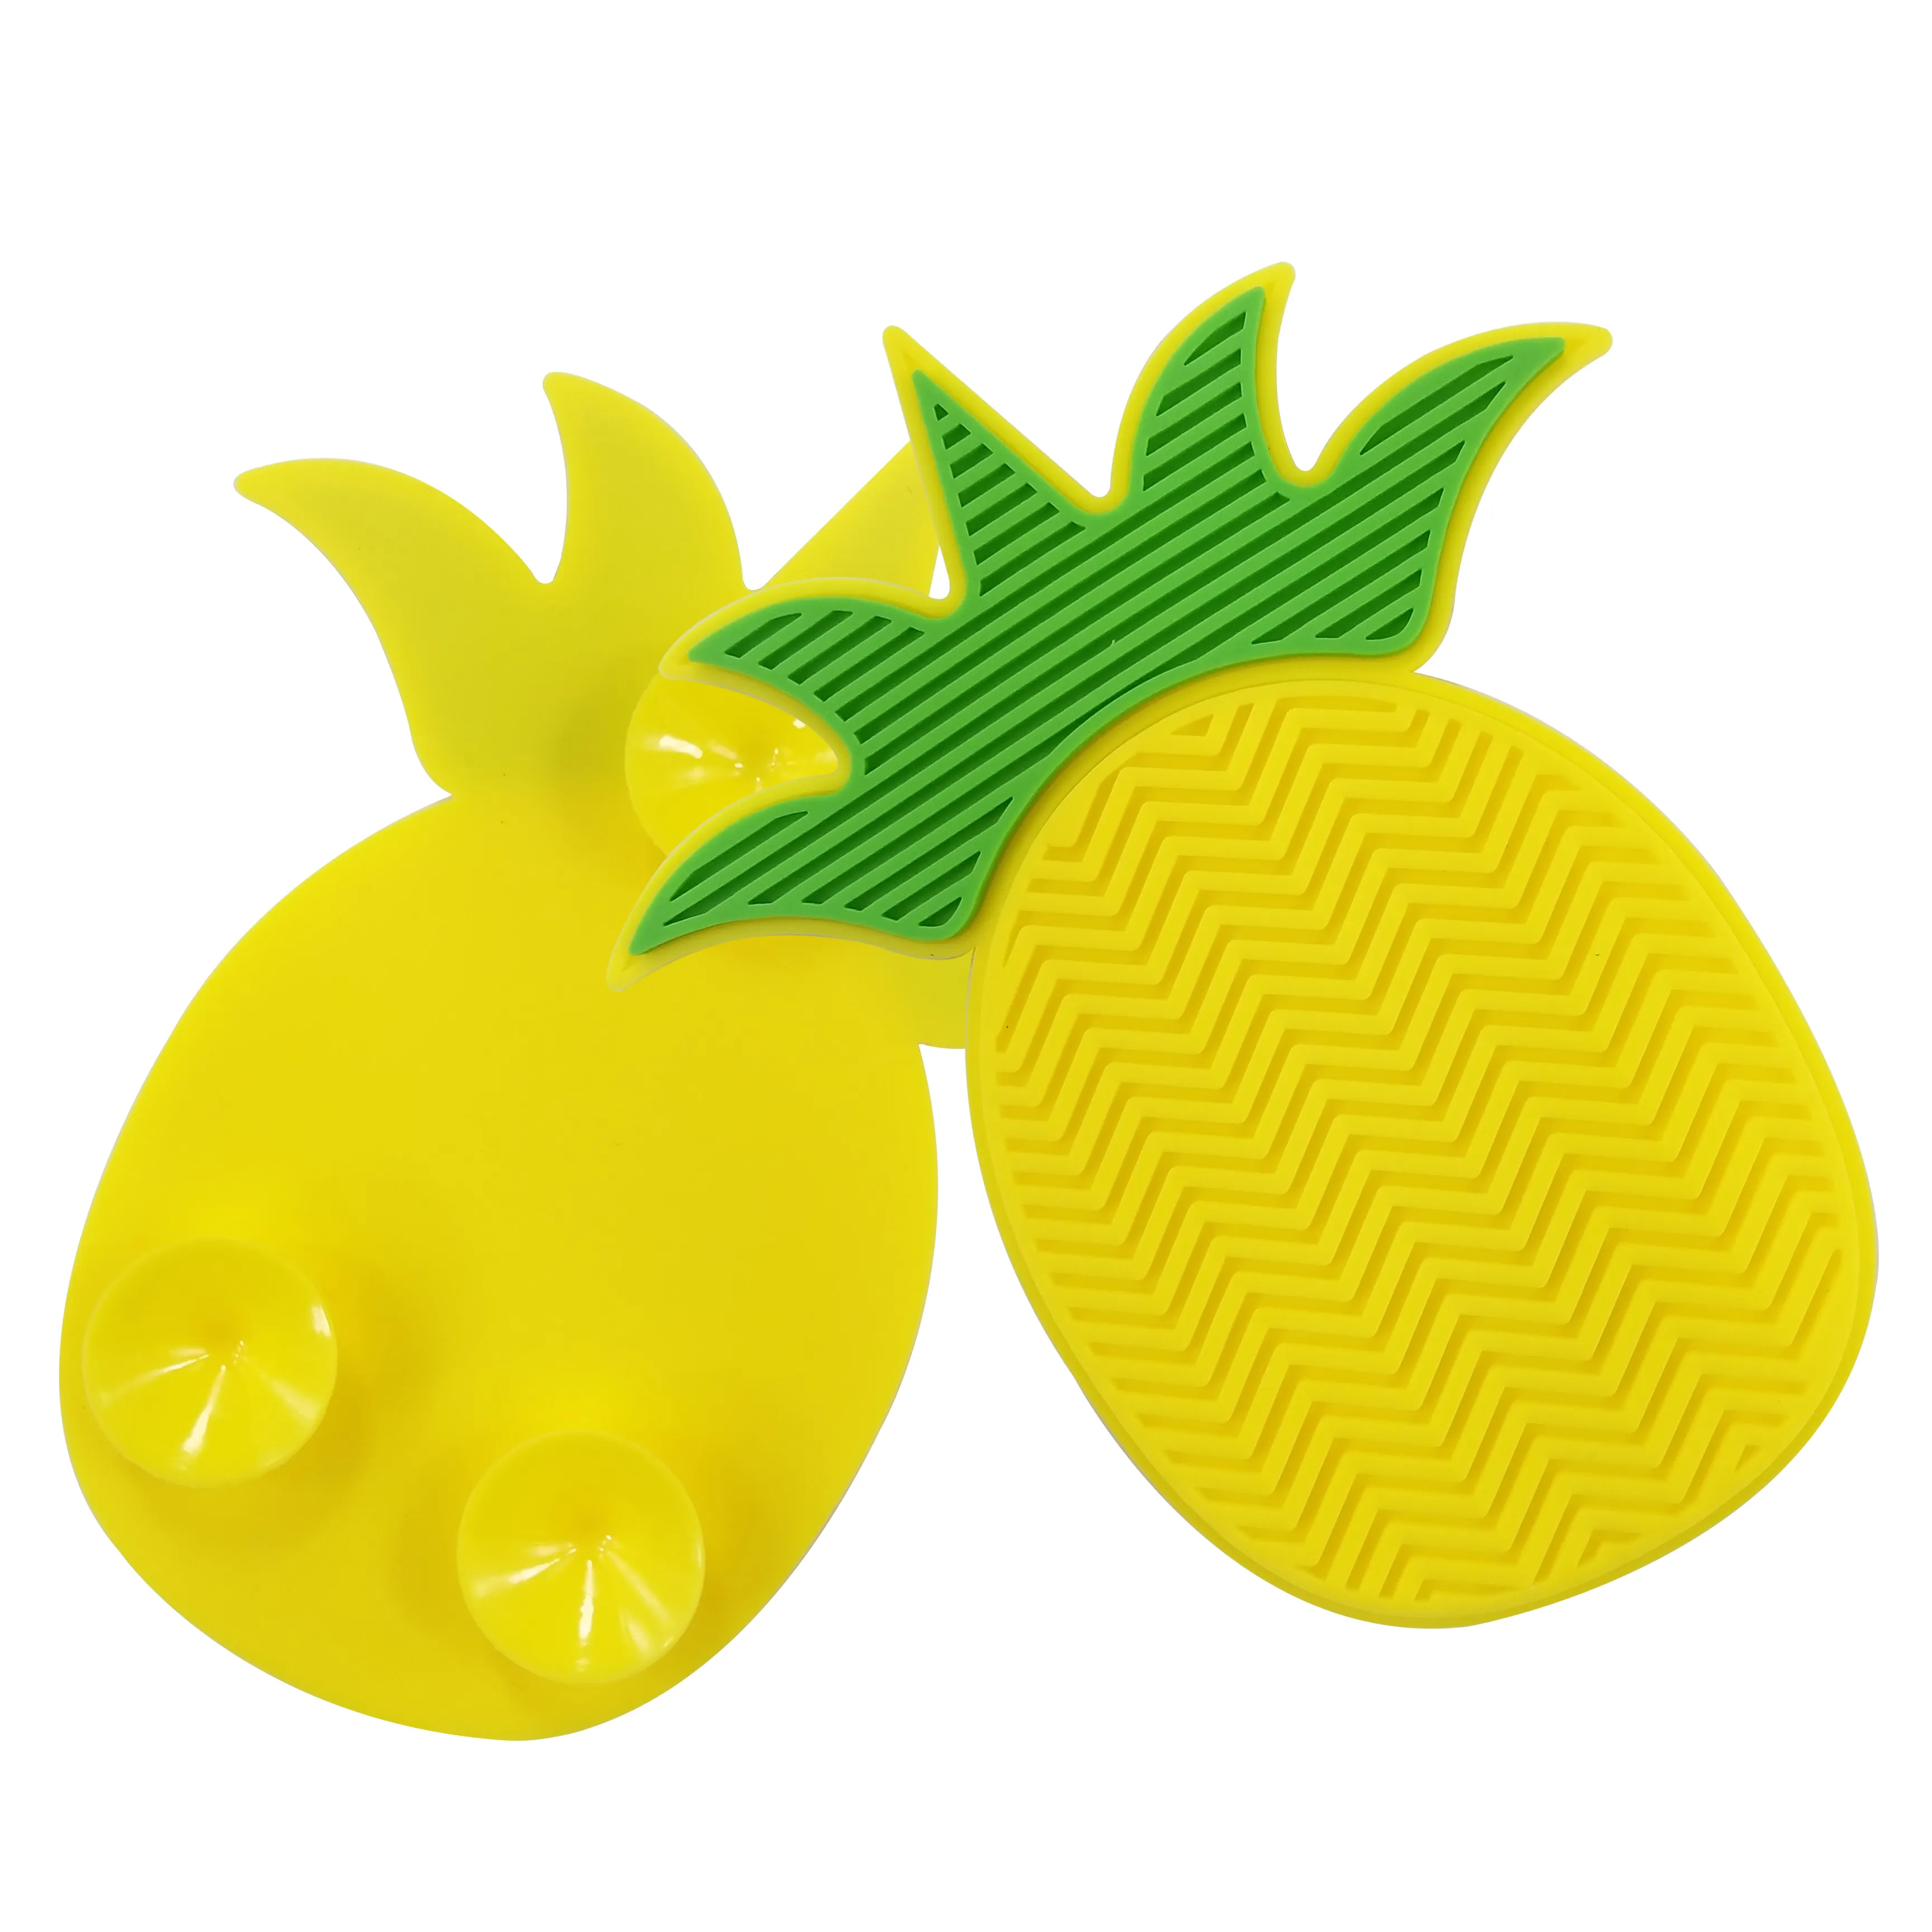 Cosmetic Brushes Silicone Cleaner Pad Pineapple Cute Makeup Brush Cleaning Mat